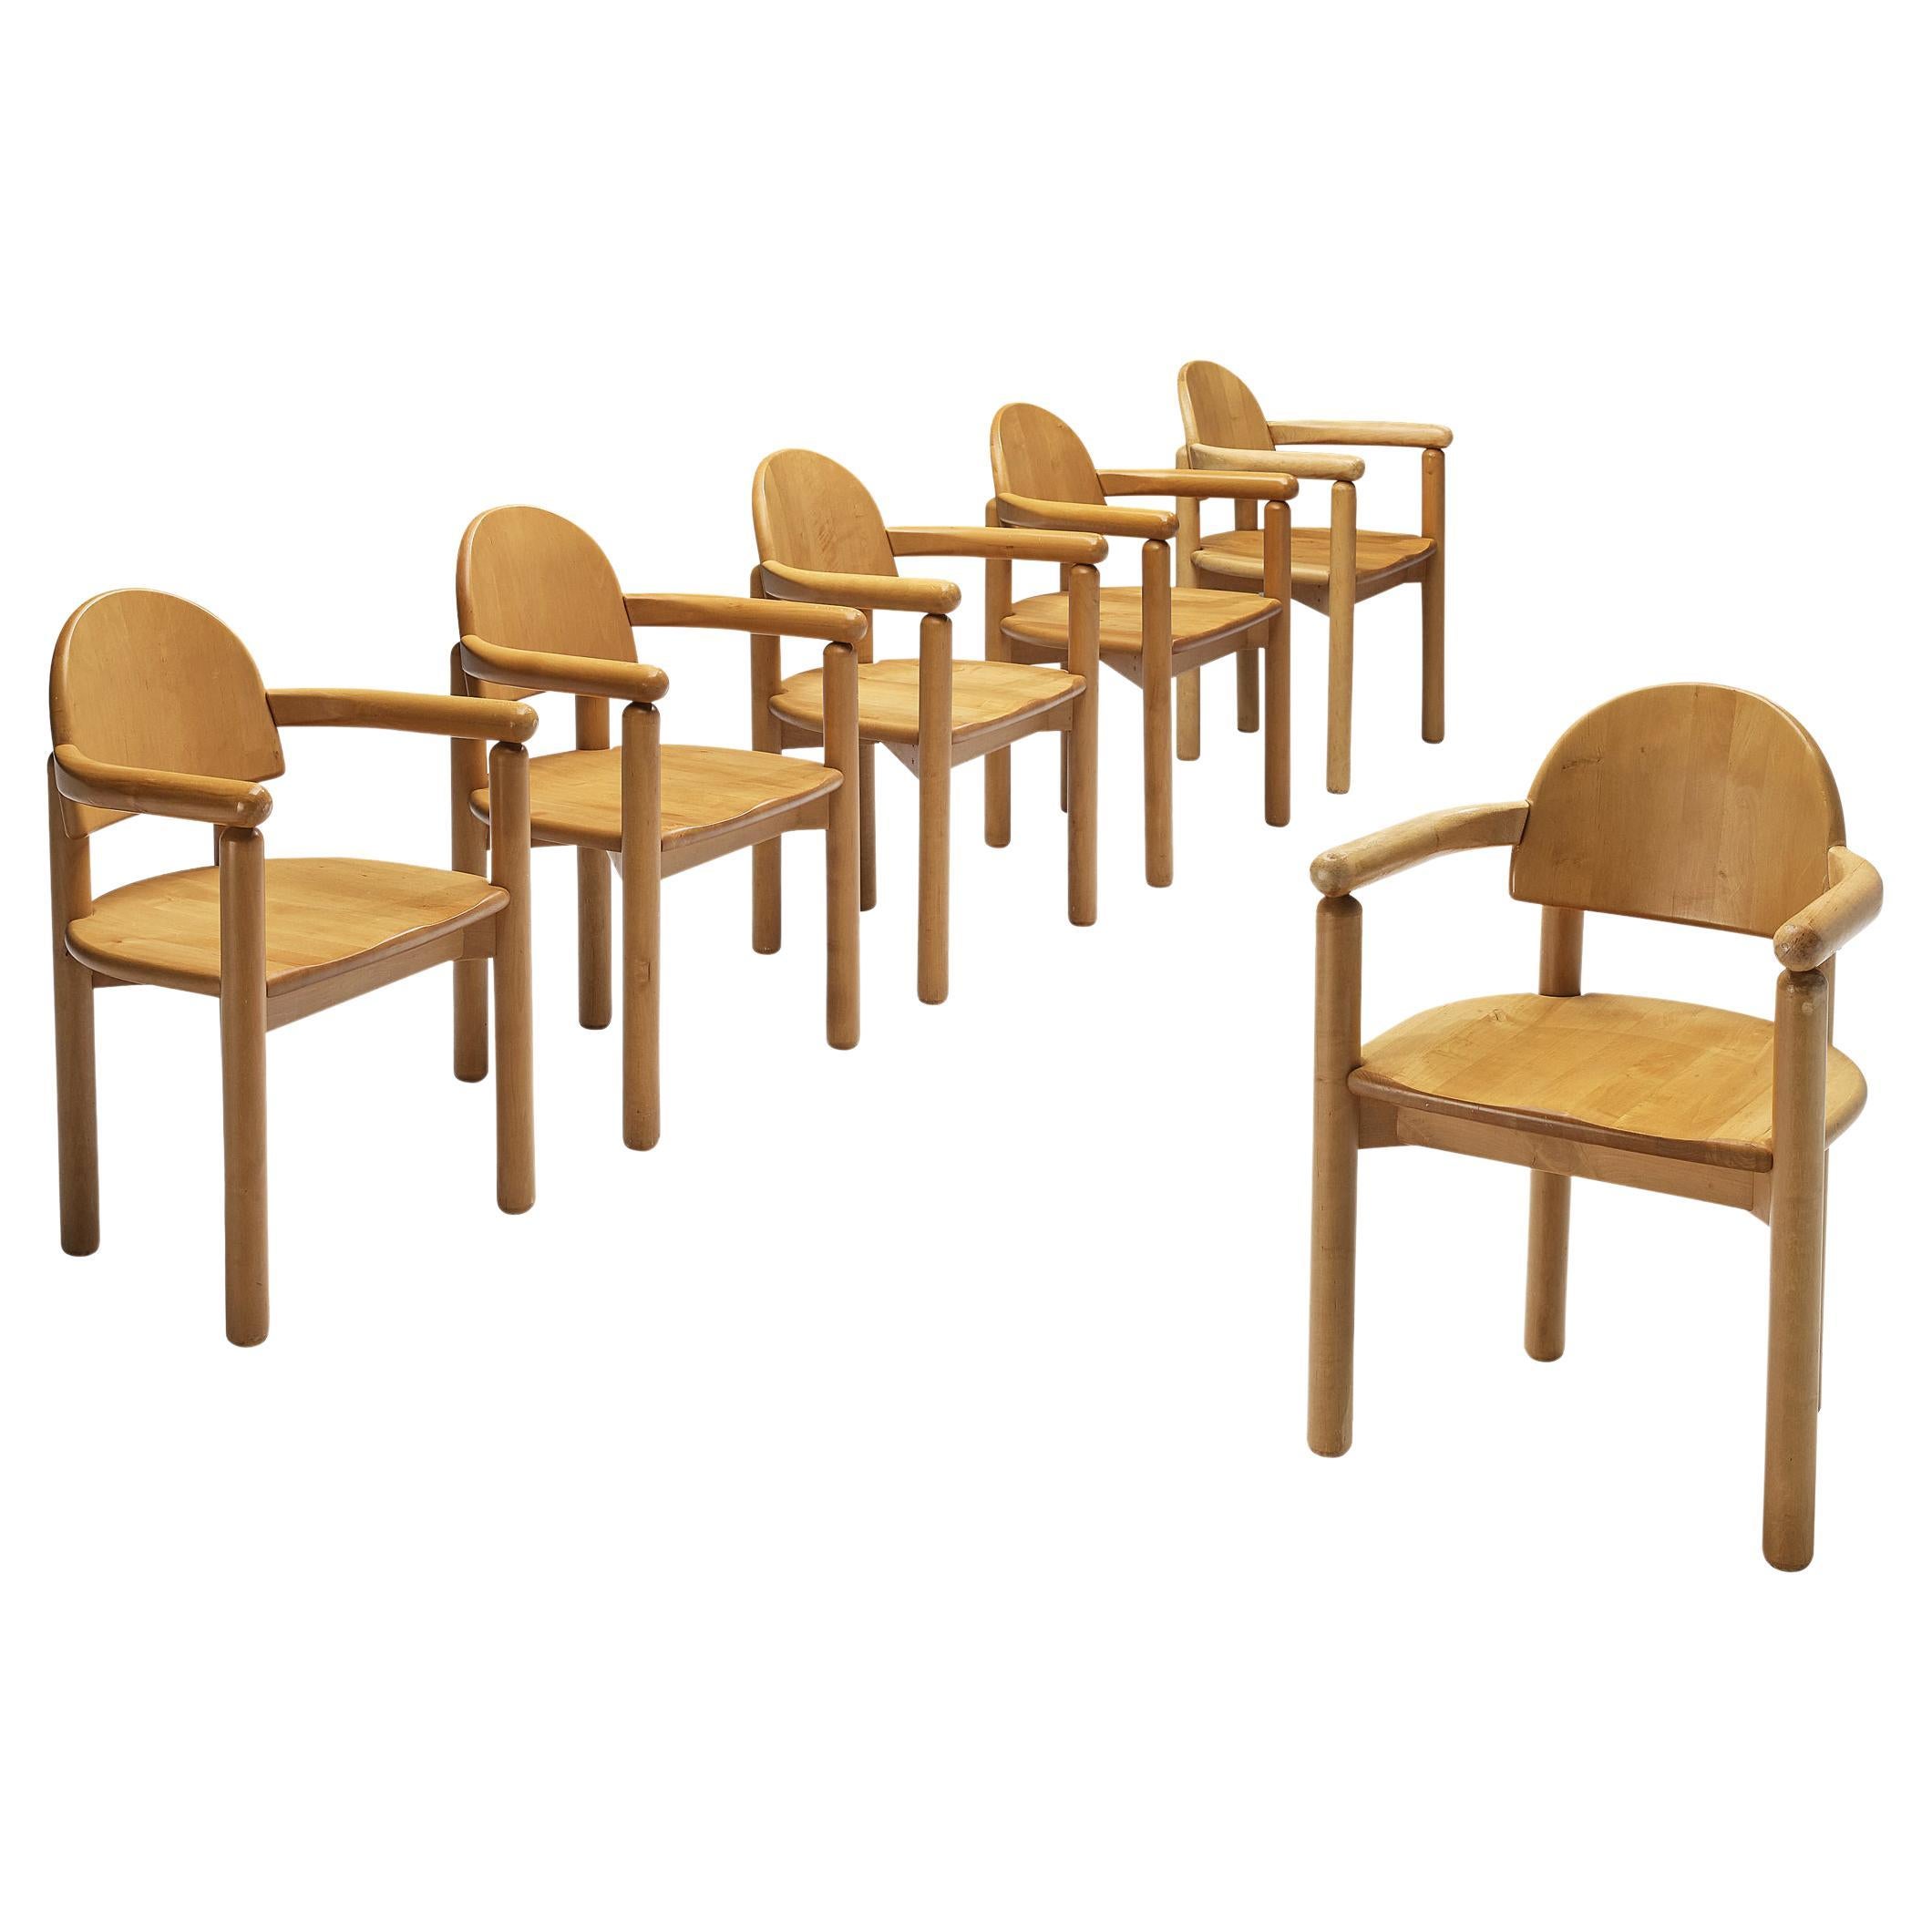 Rainer Daumiller Set of Six Dining Chairs in Solid Birch